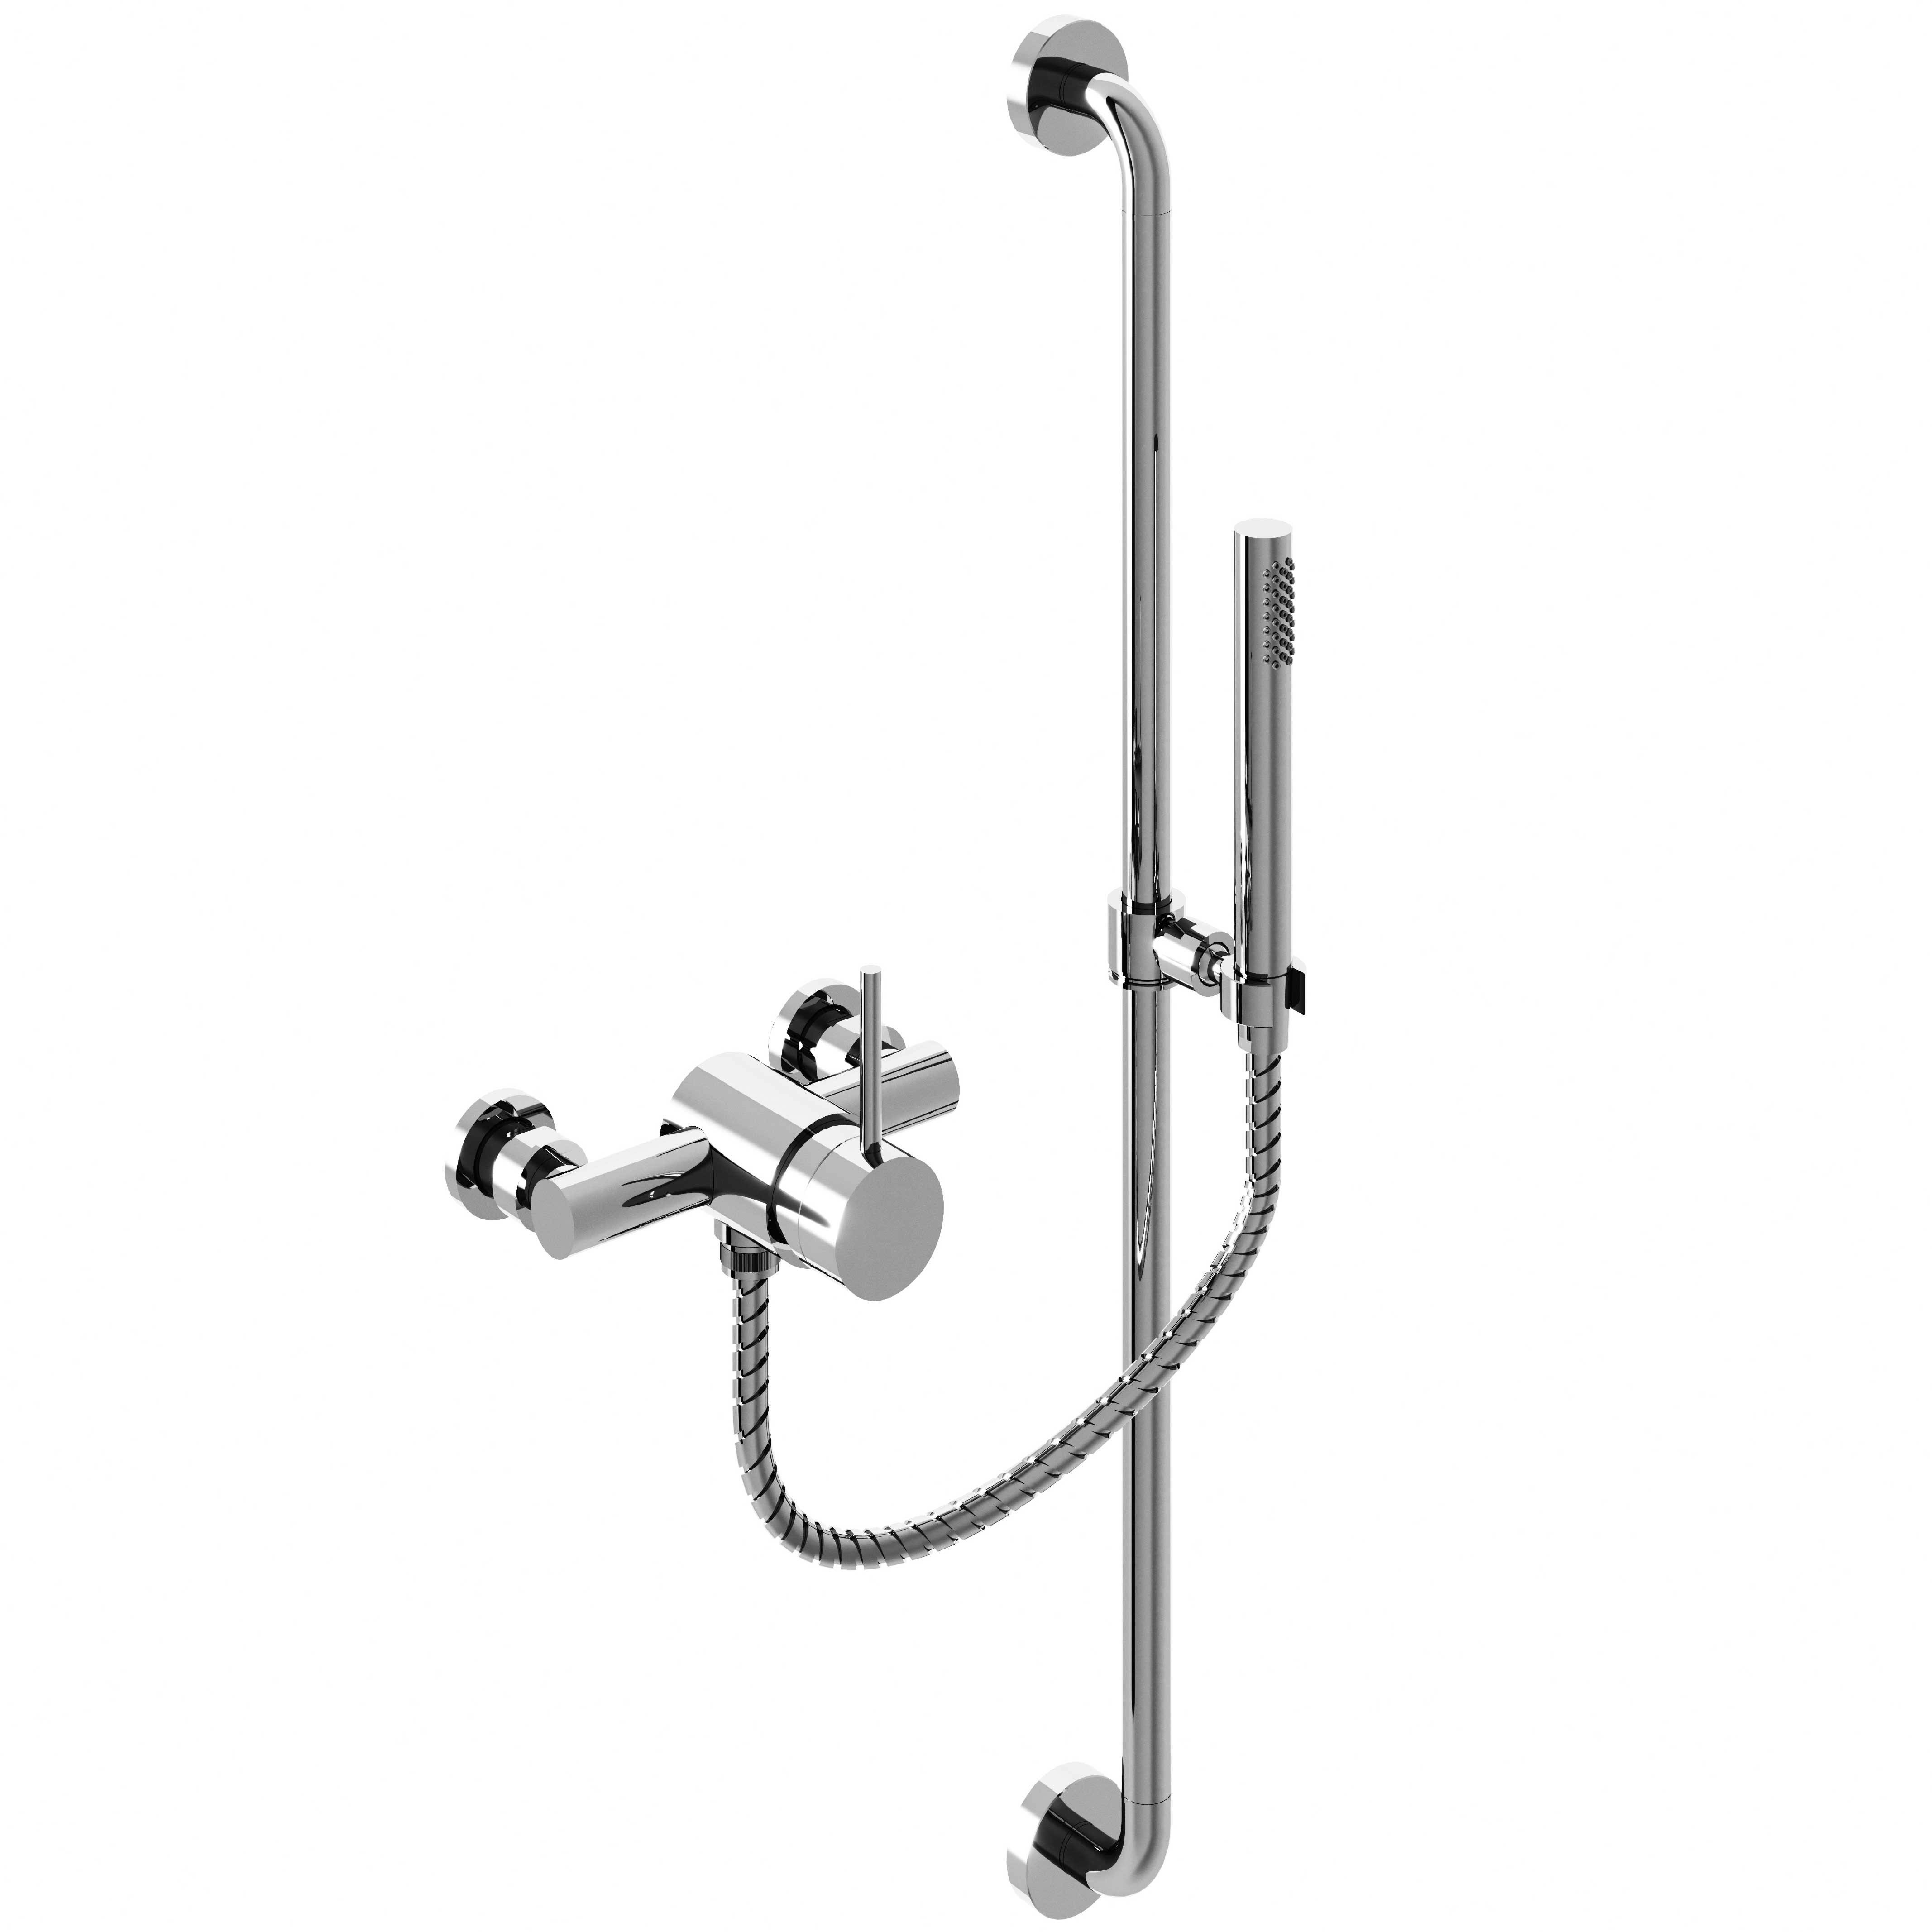 M90-2202M Single-lever shower mixer with sliding bar